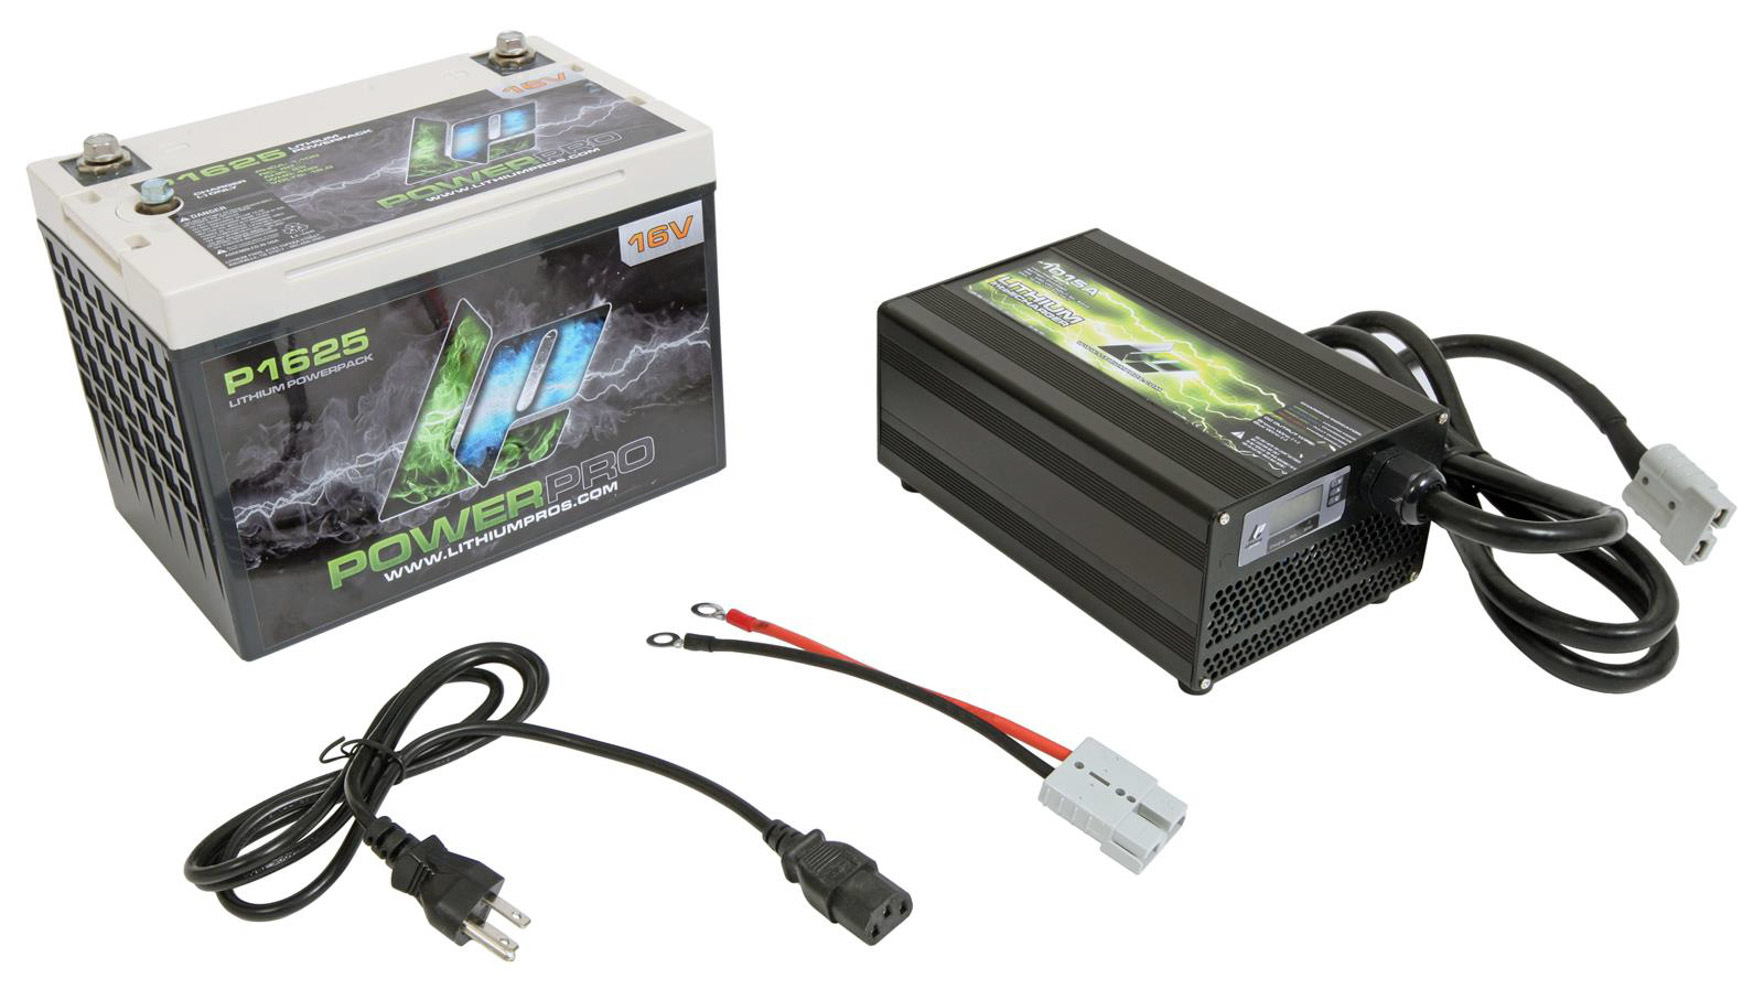 Lithium-Ion Power Pack 16V Battery w/Charger